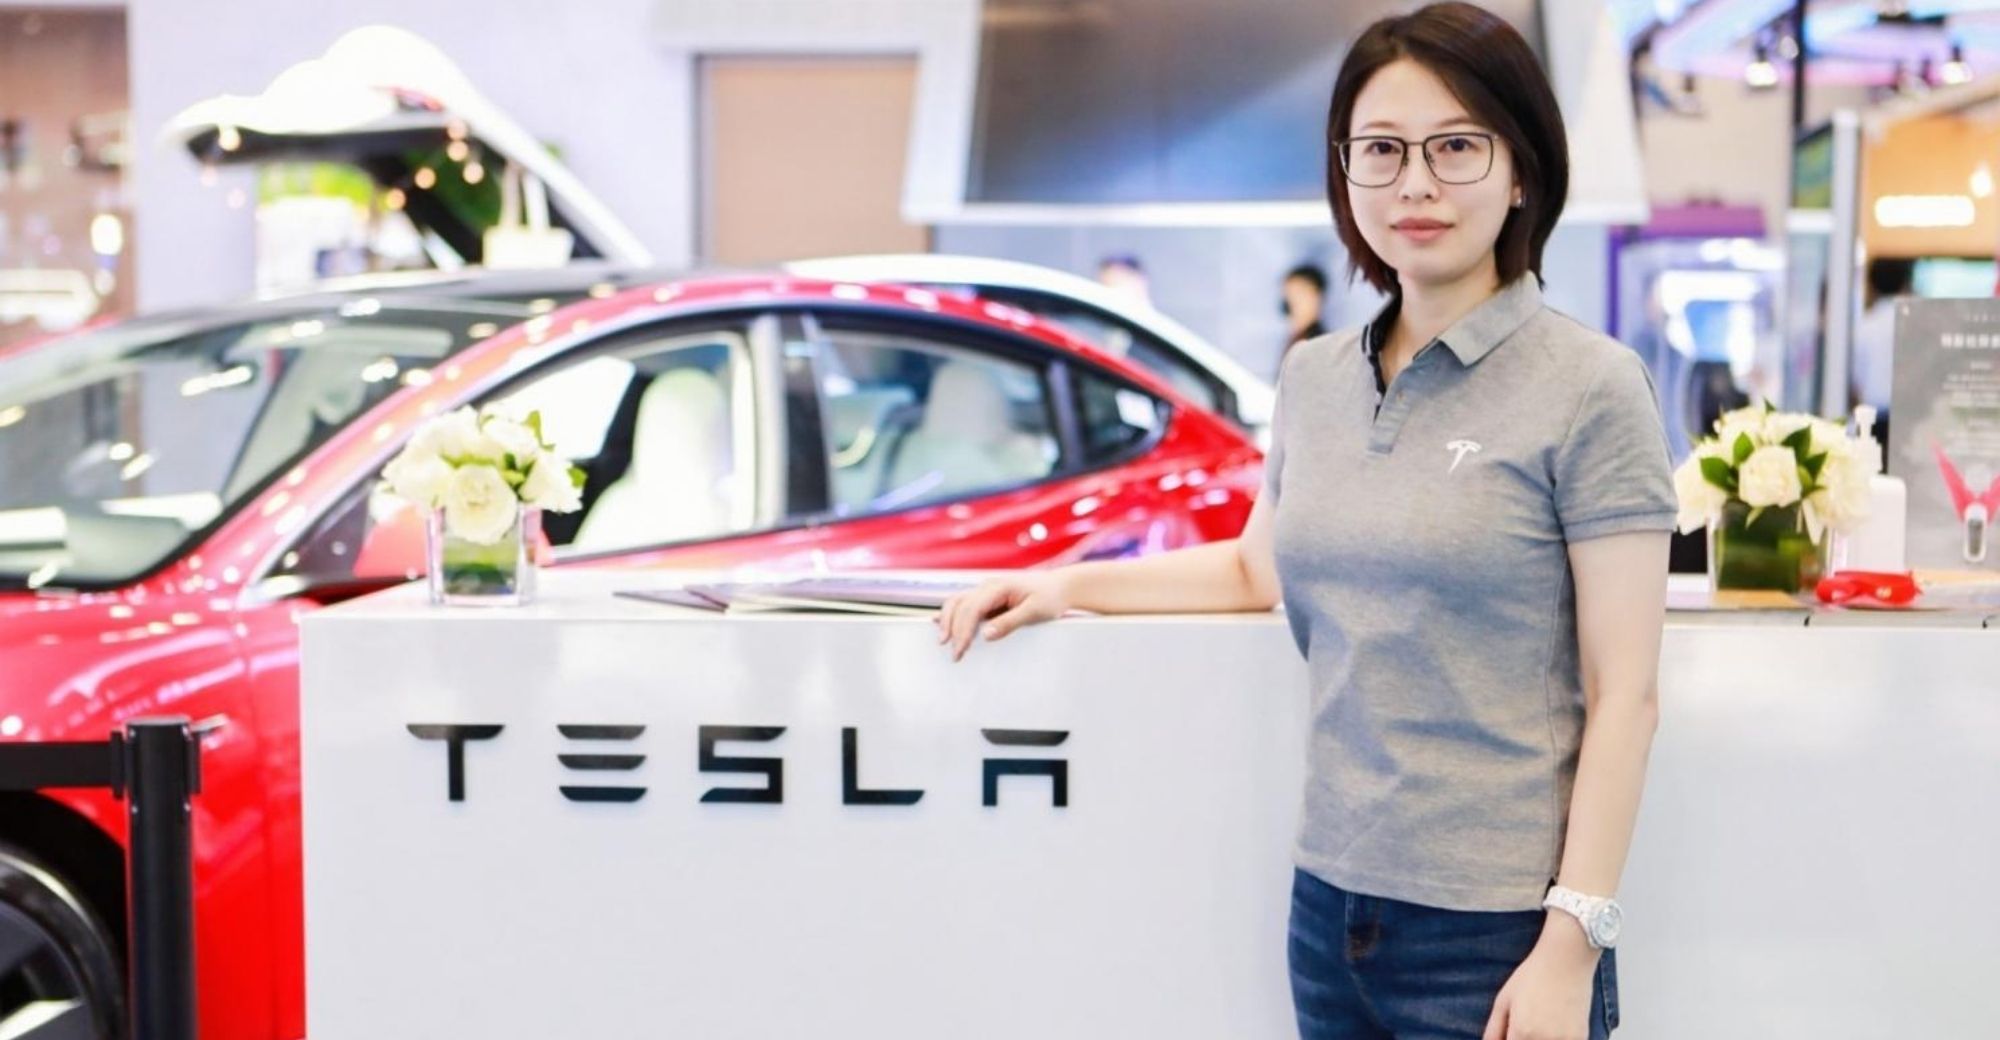 Tesla China Regional GM: We Will Contribute to Global Expansion of “Made in China”